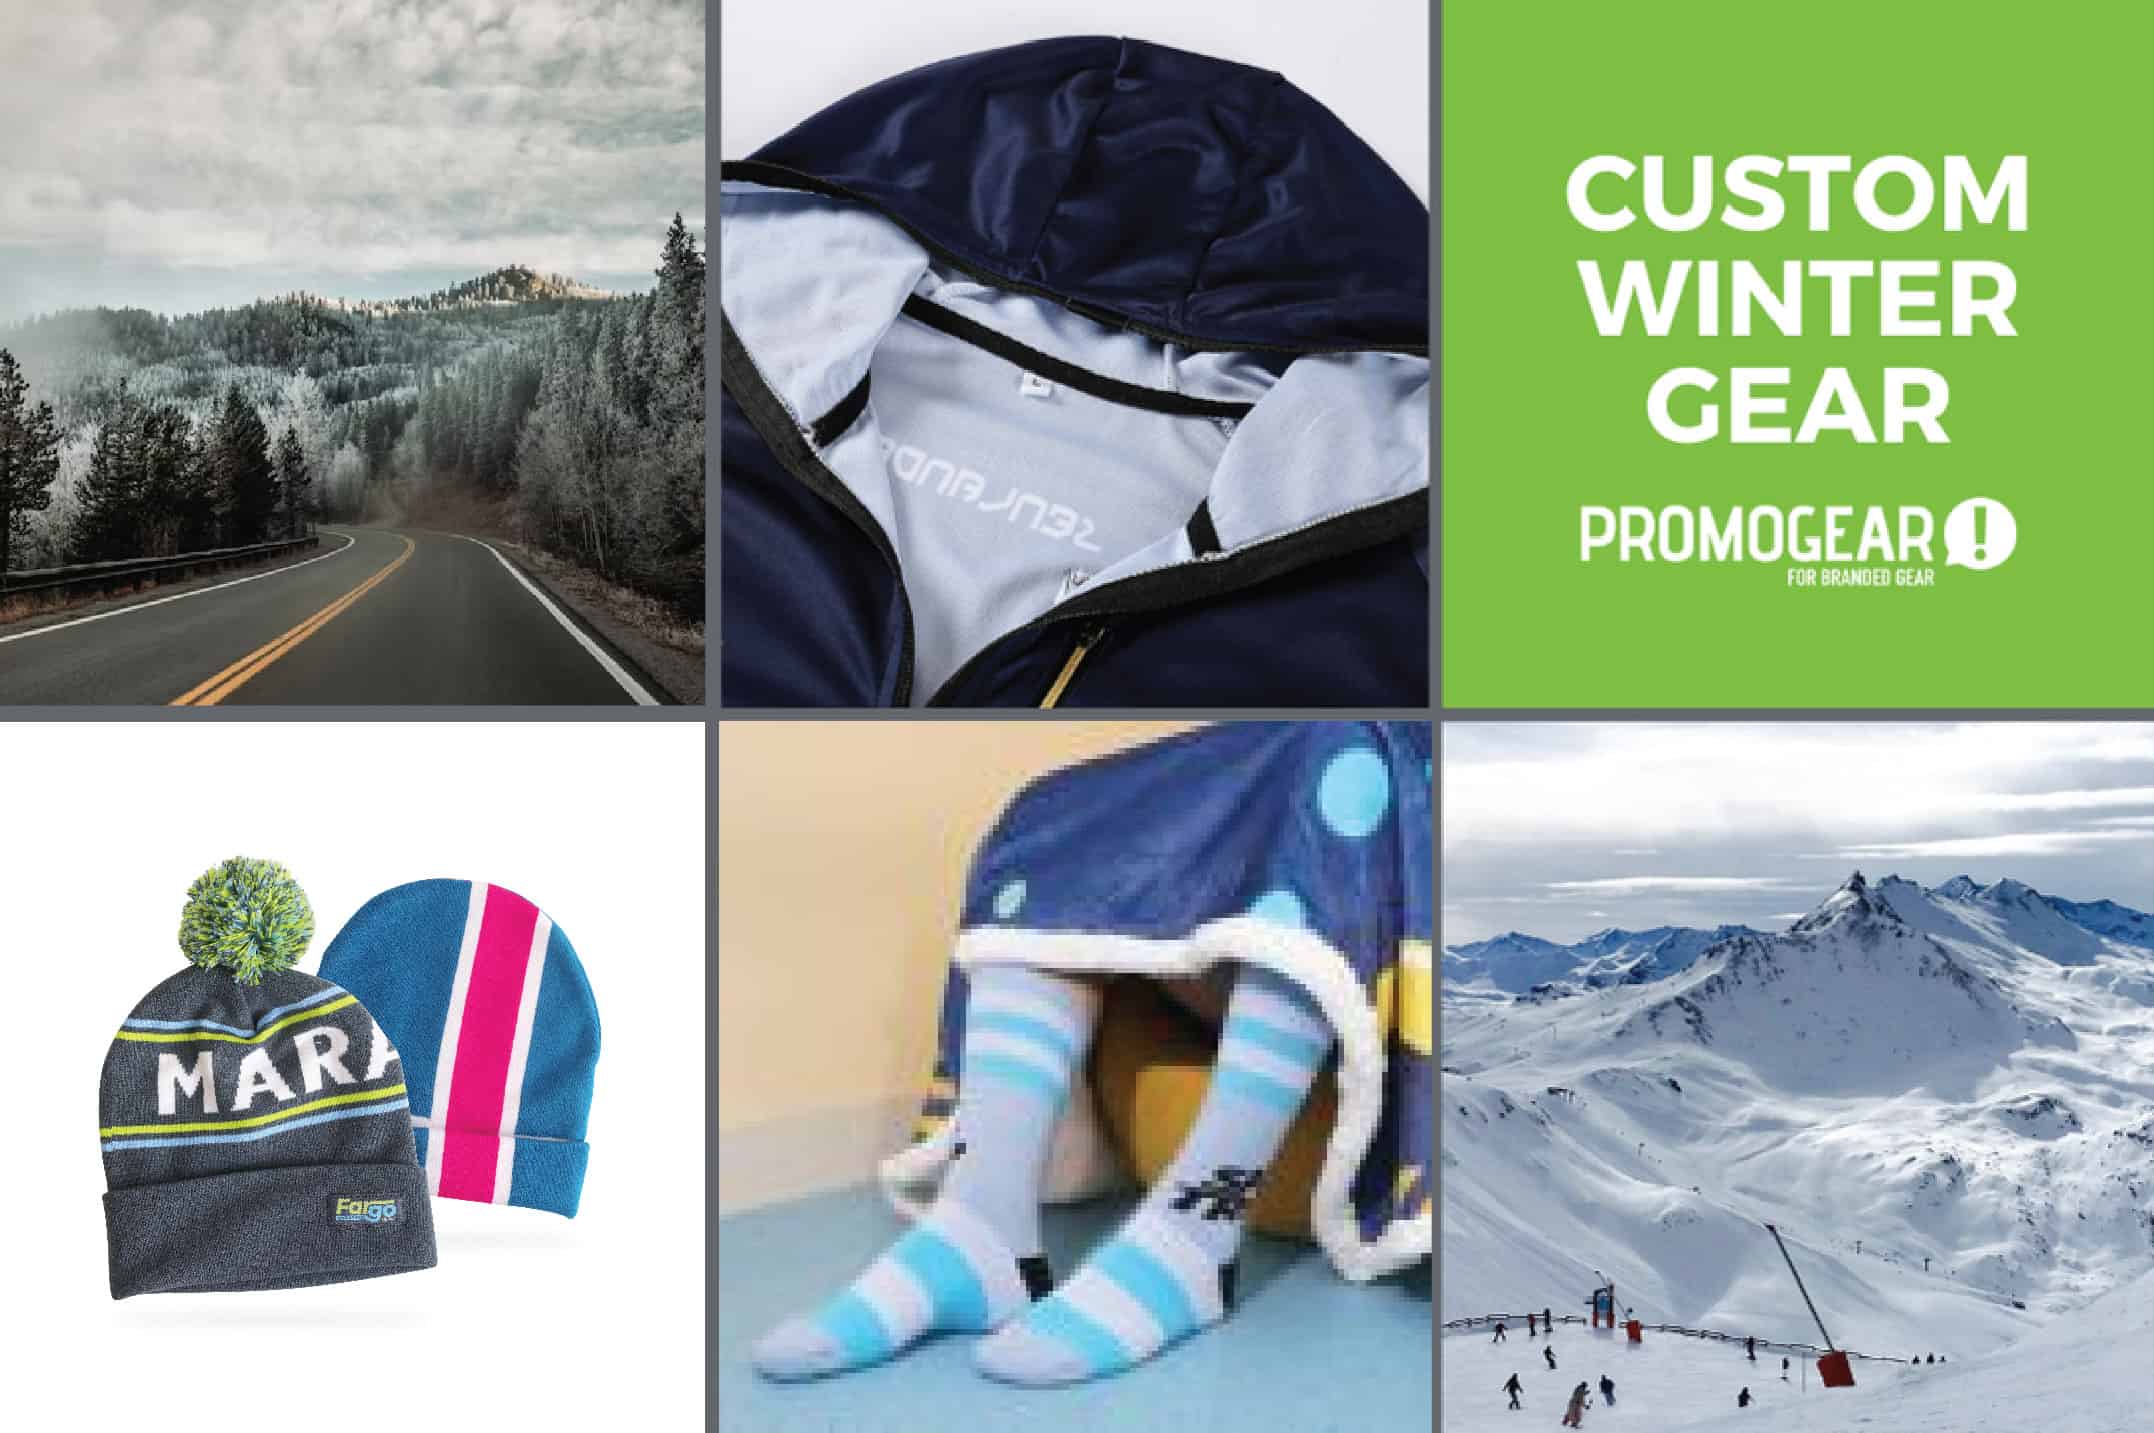 Promotional winter gear collage image.